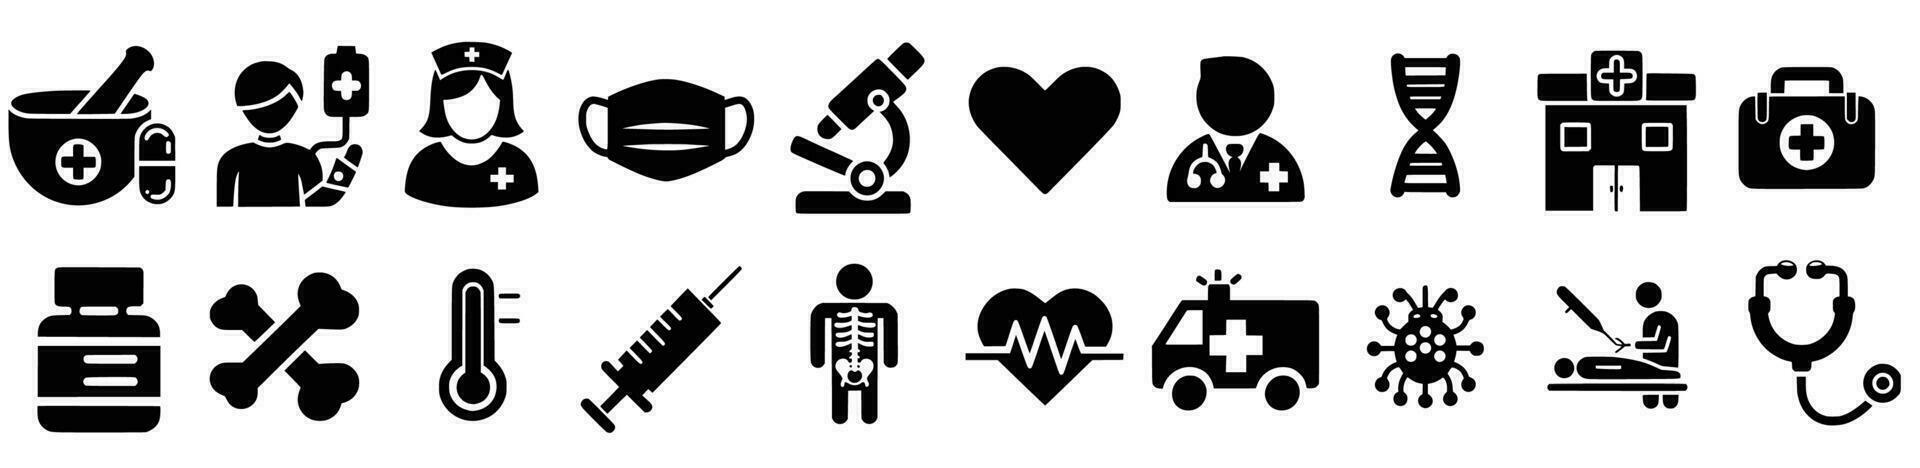 Healthcare - thin line vector icon set. Pixel perfect. Editable stroke. The set contains icons Healthcare And Medicine, Doctor, Telemedicine, Medical Exam, Electrocardiography, First Aid, Ambulance